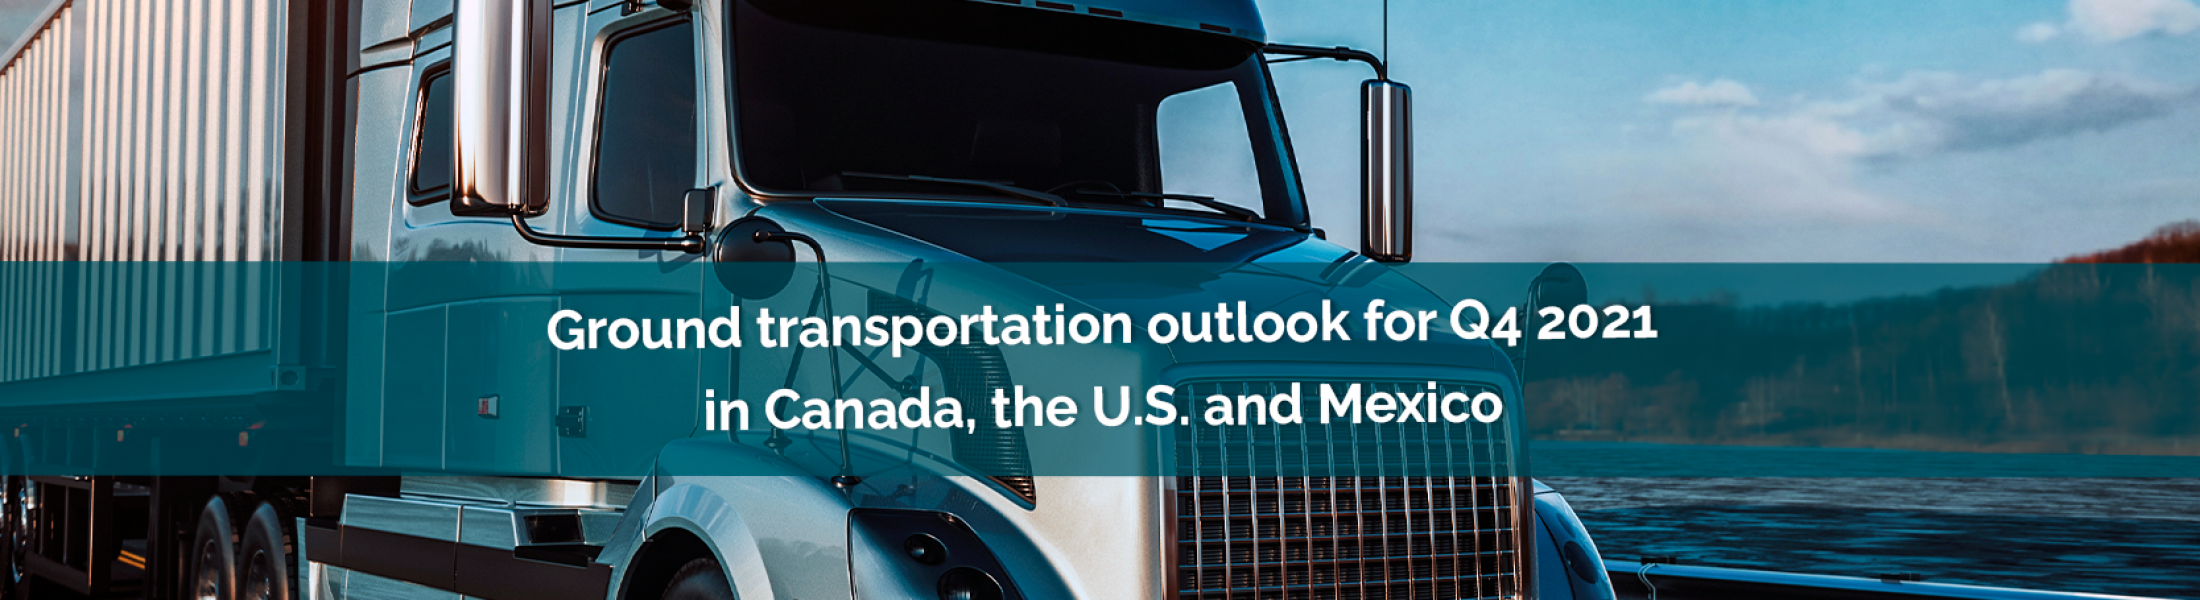 Ground transportation outlook for Q4 2021 in Canada, the U.S. and